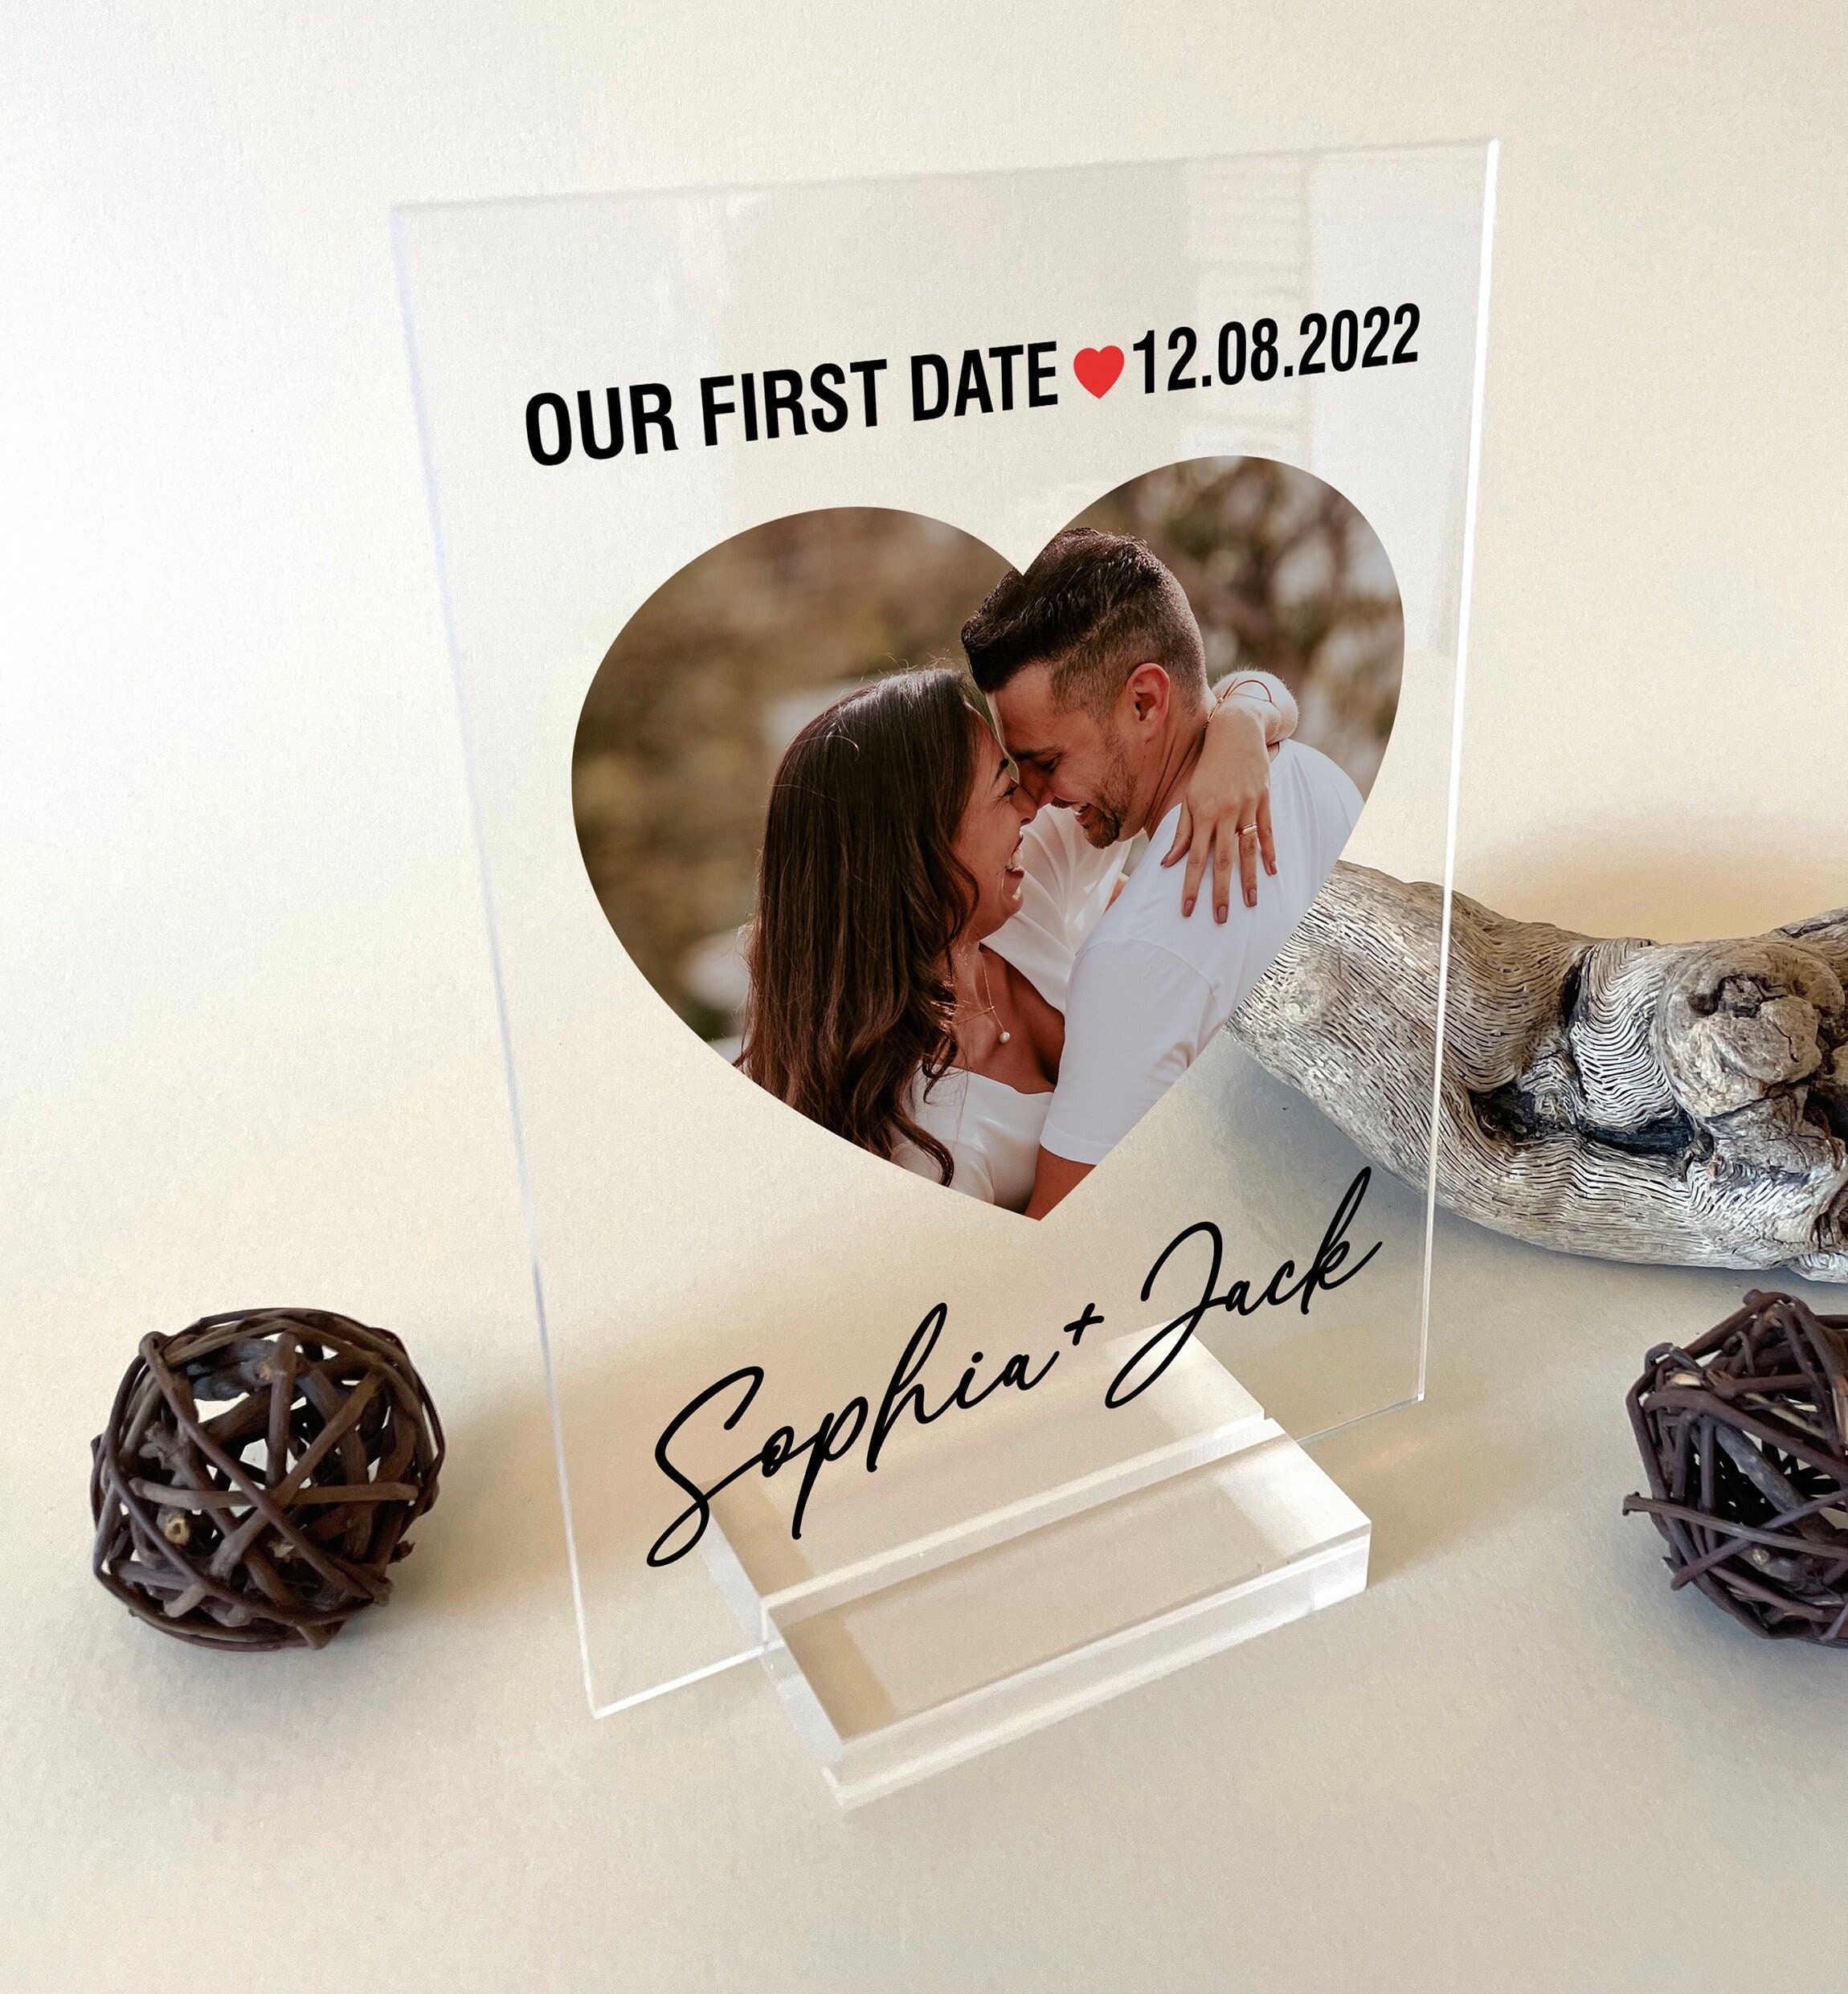 Personalized Acrylic Map, Our First Date Map, Our First Date